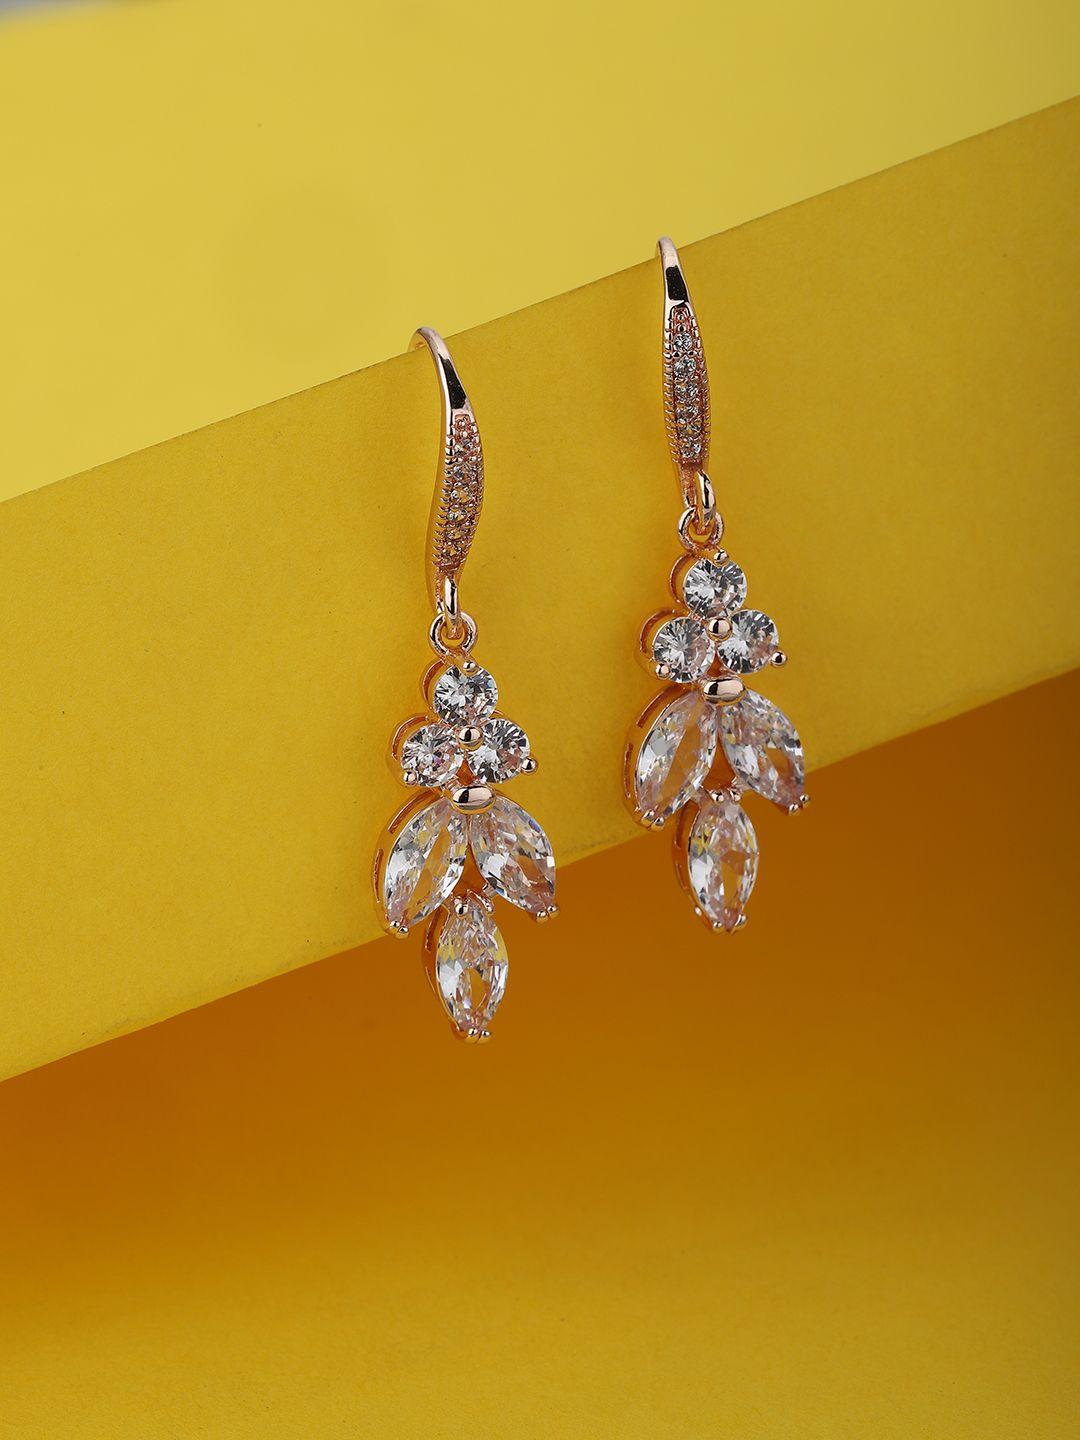 carlton london rose gold-plated cz studded contemporary drop earrings